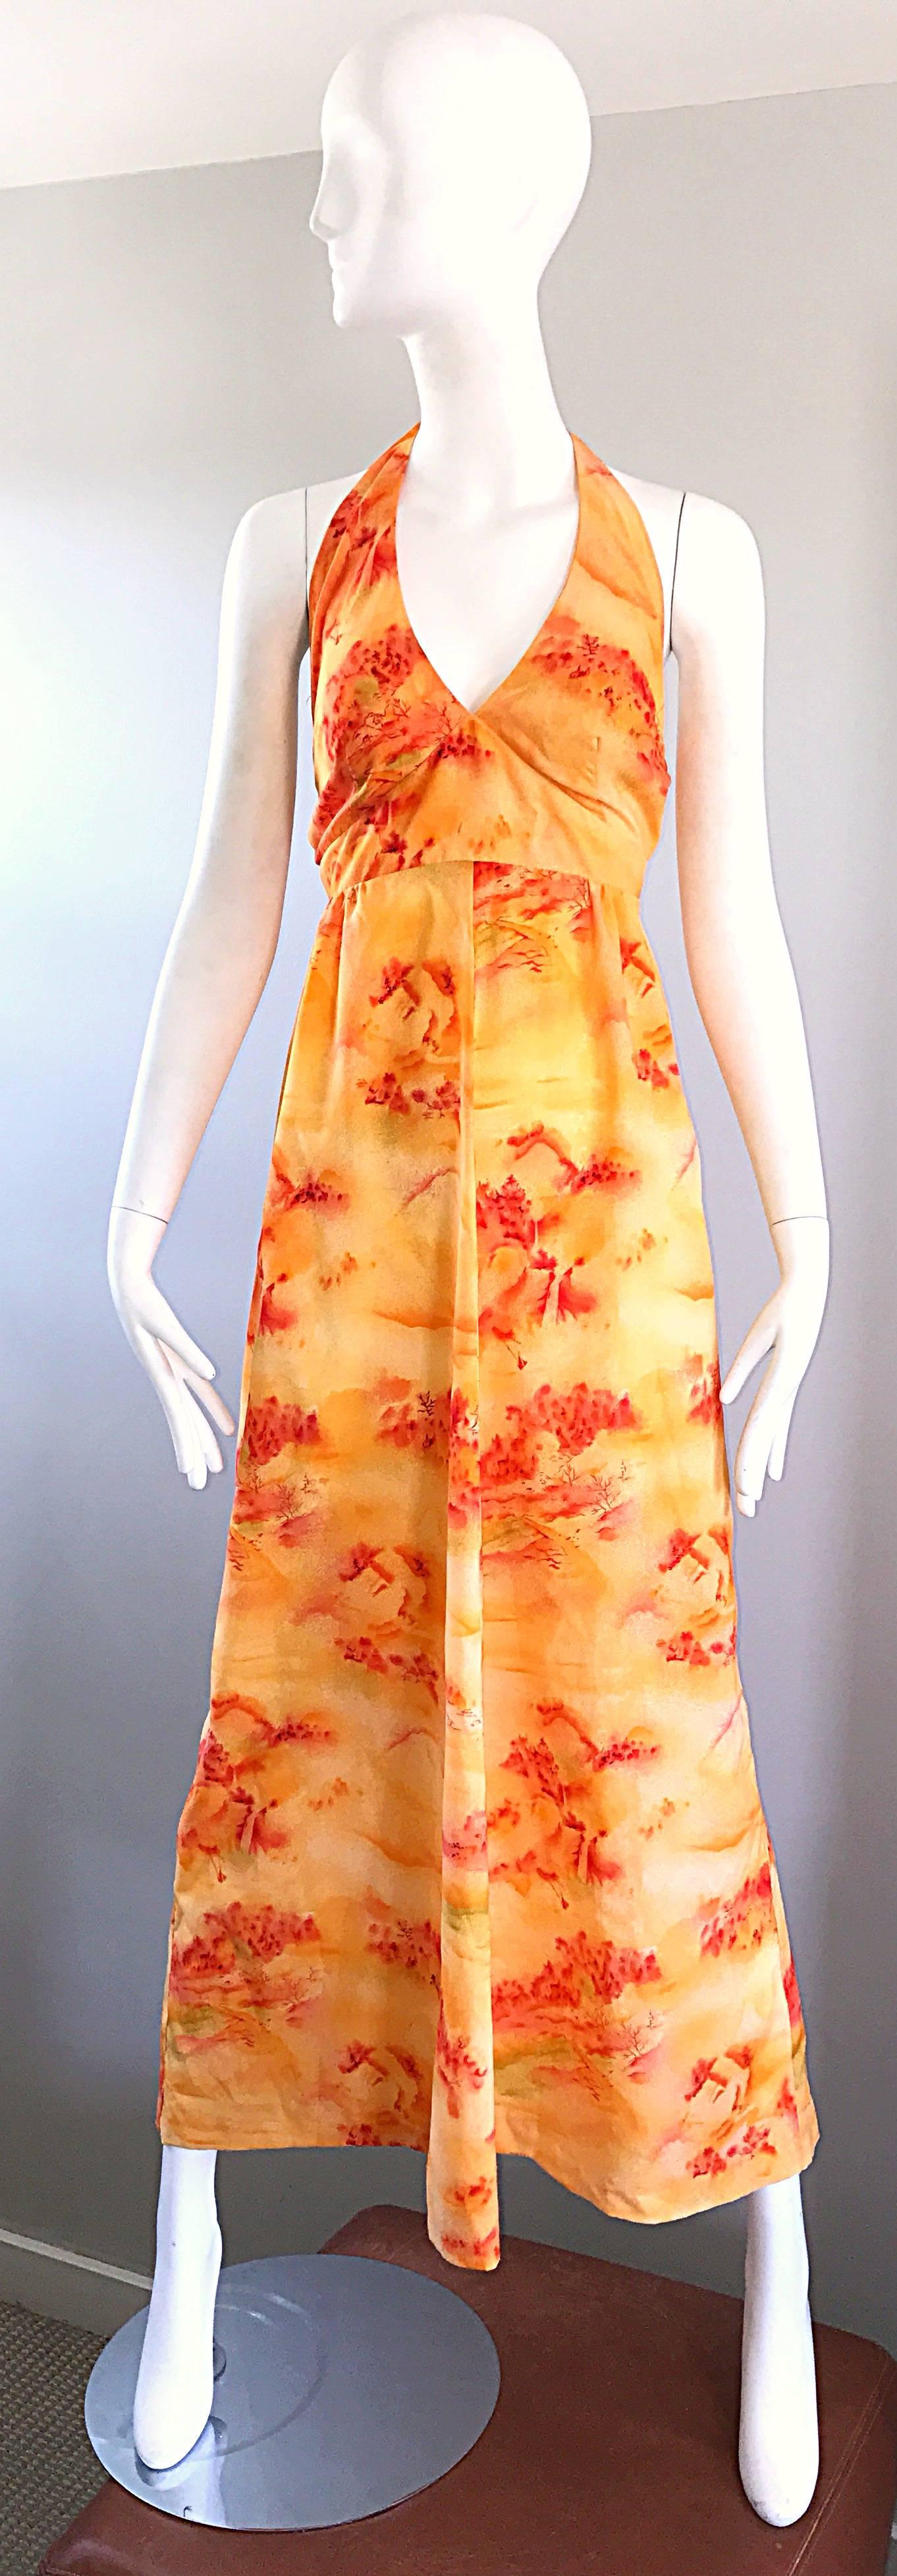 Incredible 1970s Asian themed novelty boho maxi dress! Features a vibrant bright orange, with prints in a brighter orange and red orange throughout. Ties at back top neck with zipper up the skirt. Great with sandals, flats or wedges for day and